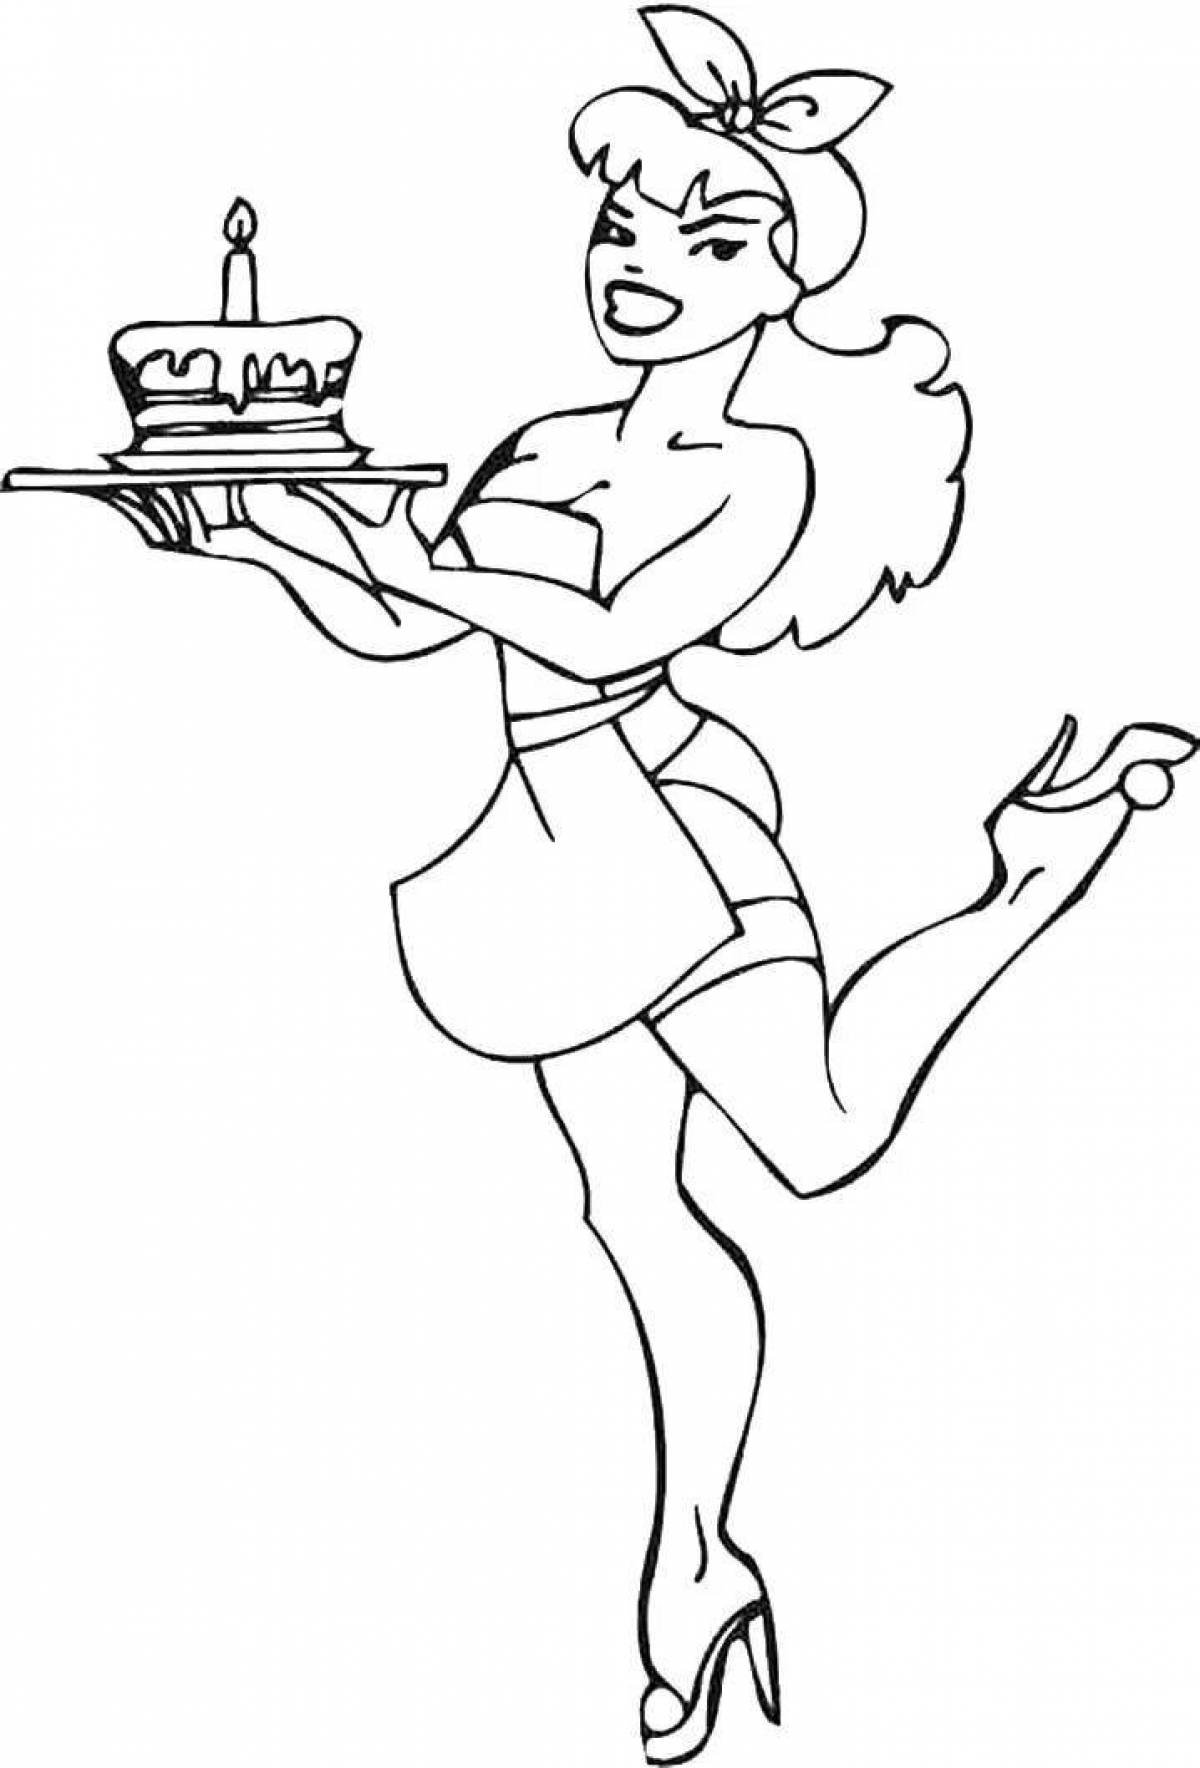 Great pin-up coloring book